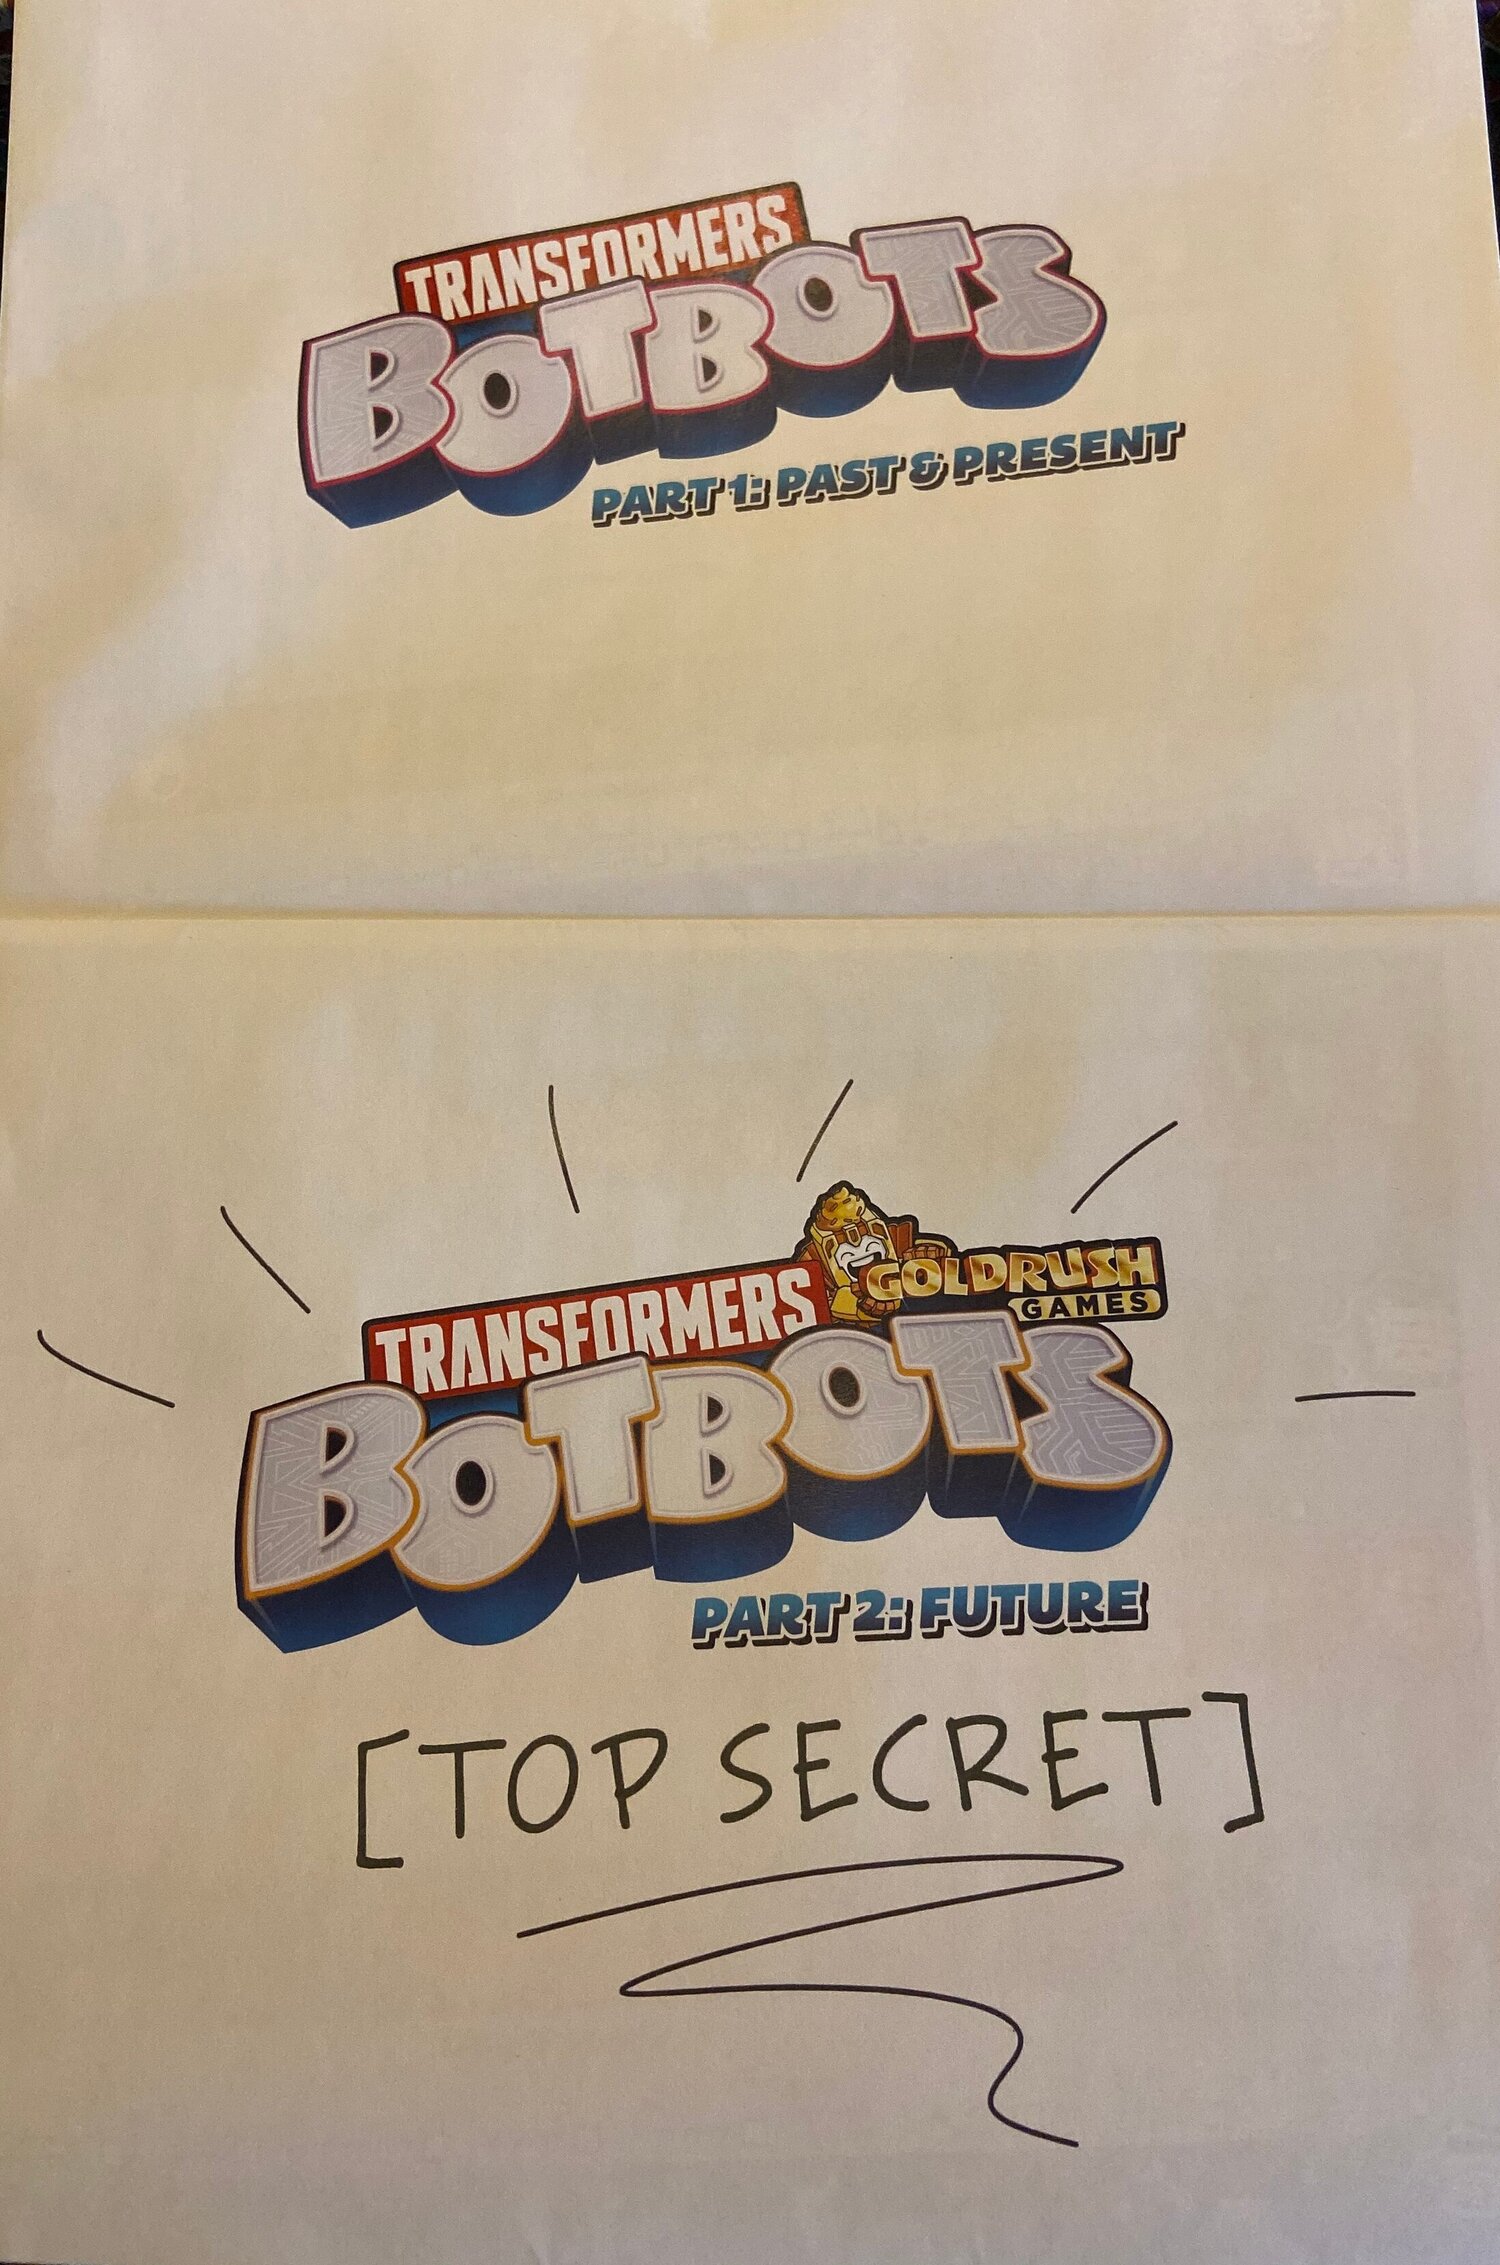 Details about   Hasbro Transformers Botbots Serie 2 New In Package